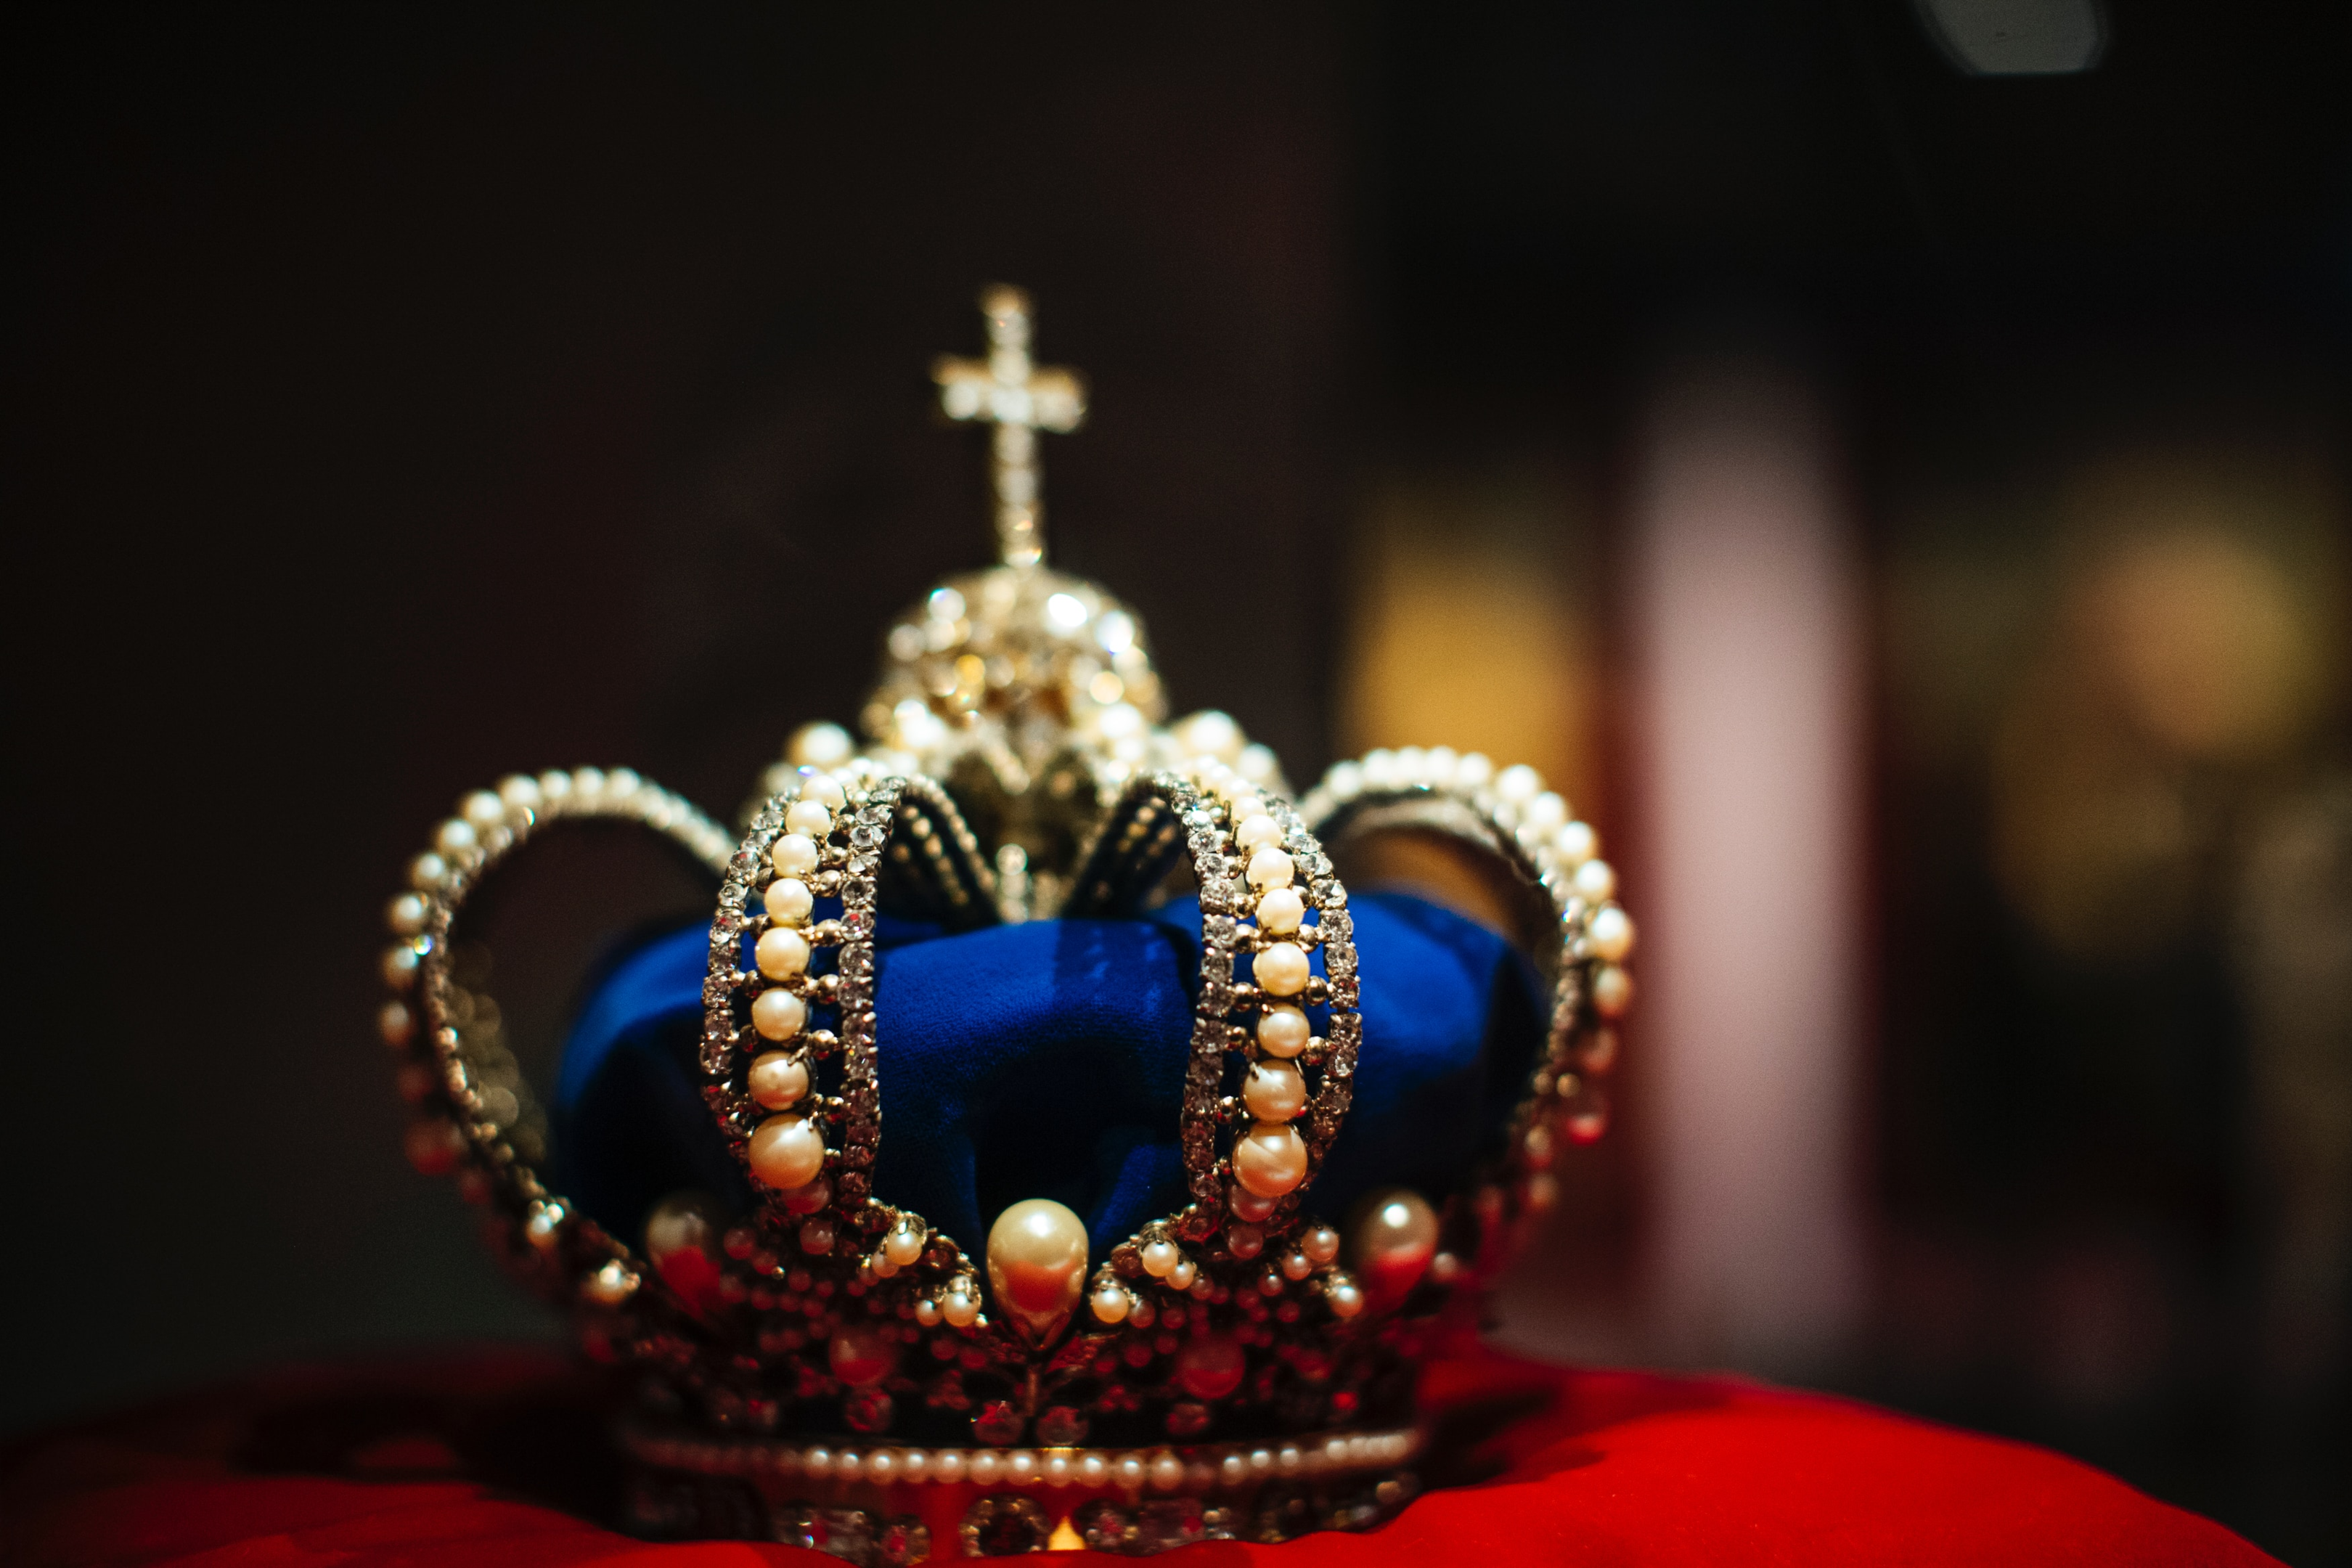 A blue crown with gold inlay